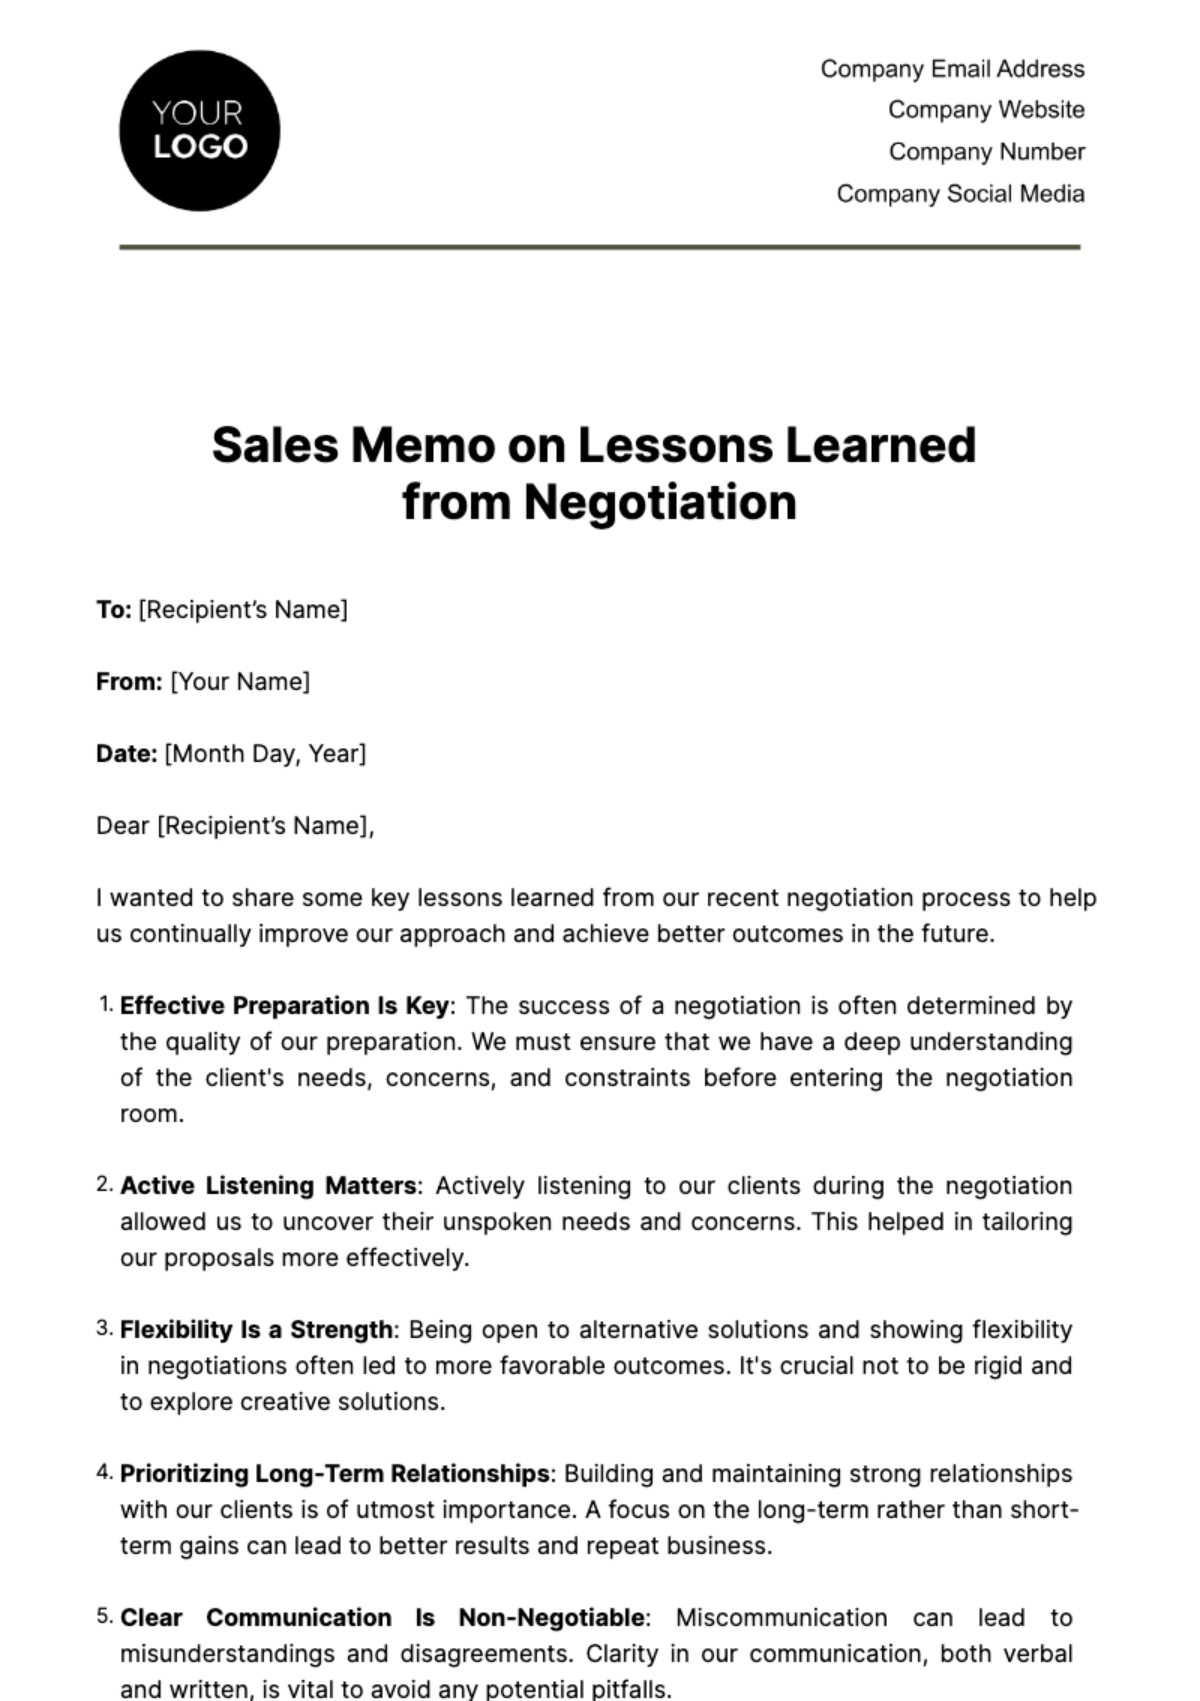 Sales Memo on Lessons Learned from Negotiation Template